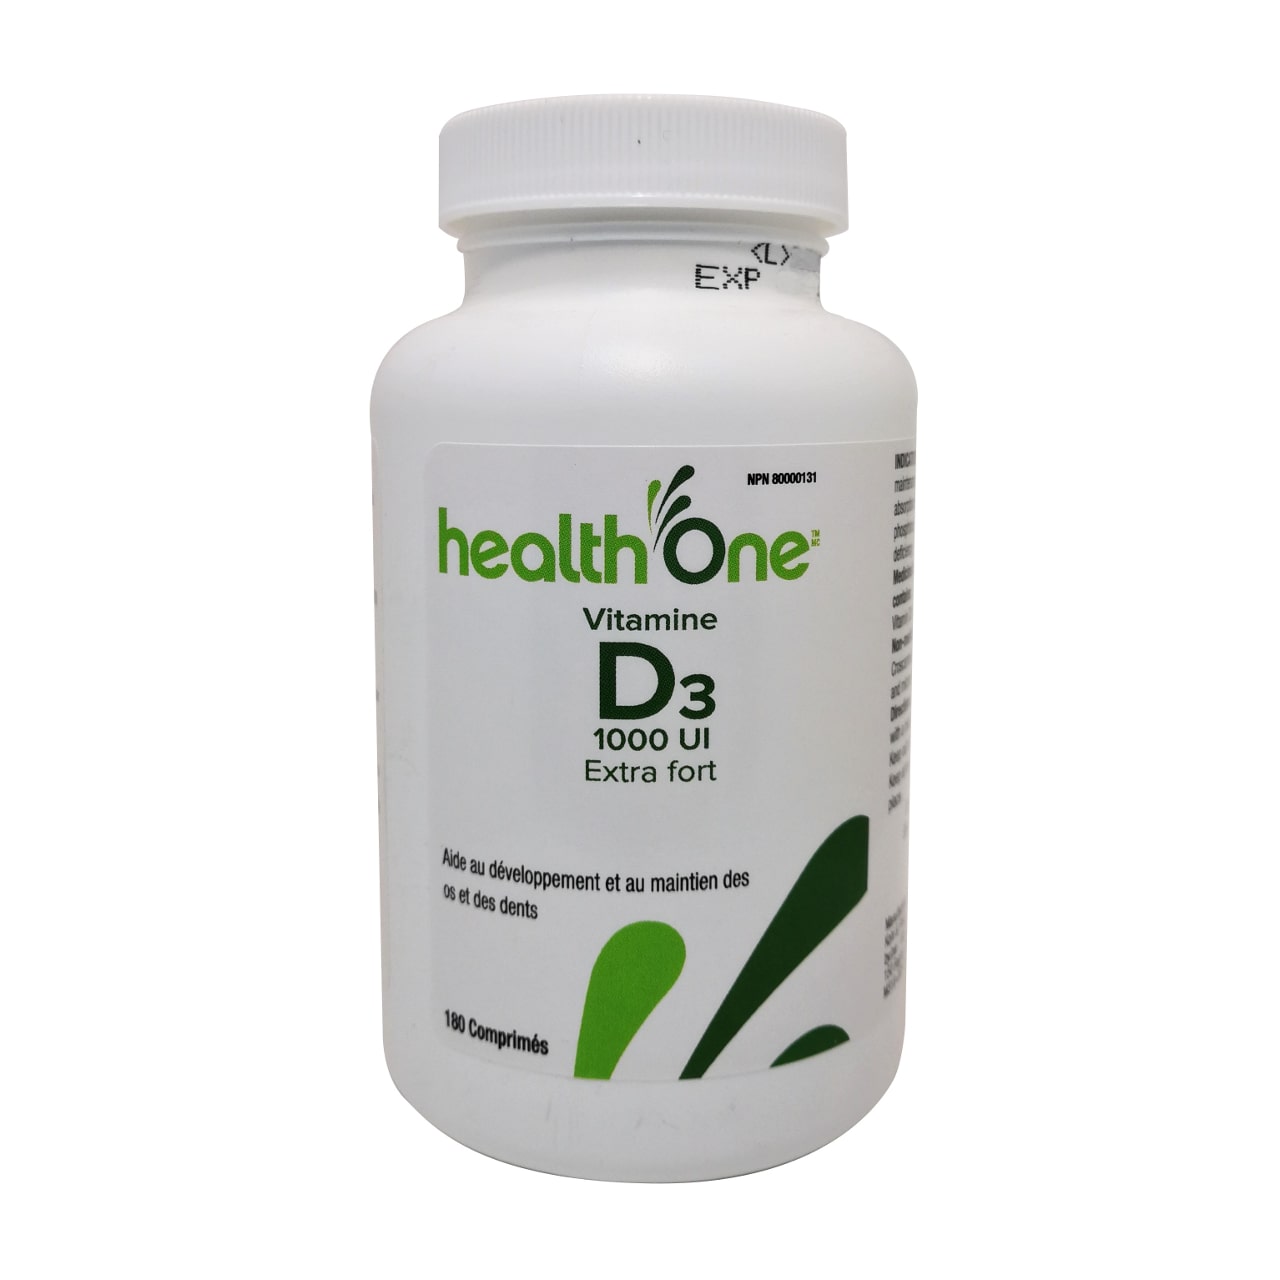 Product label for health One Vitamin D3 Extra Strength 1000IU in French